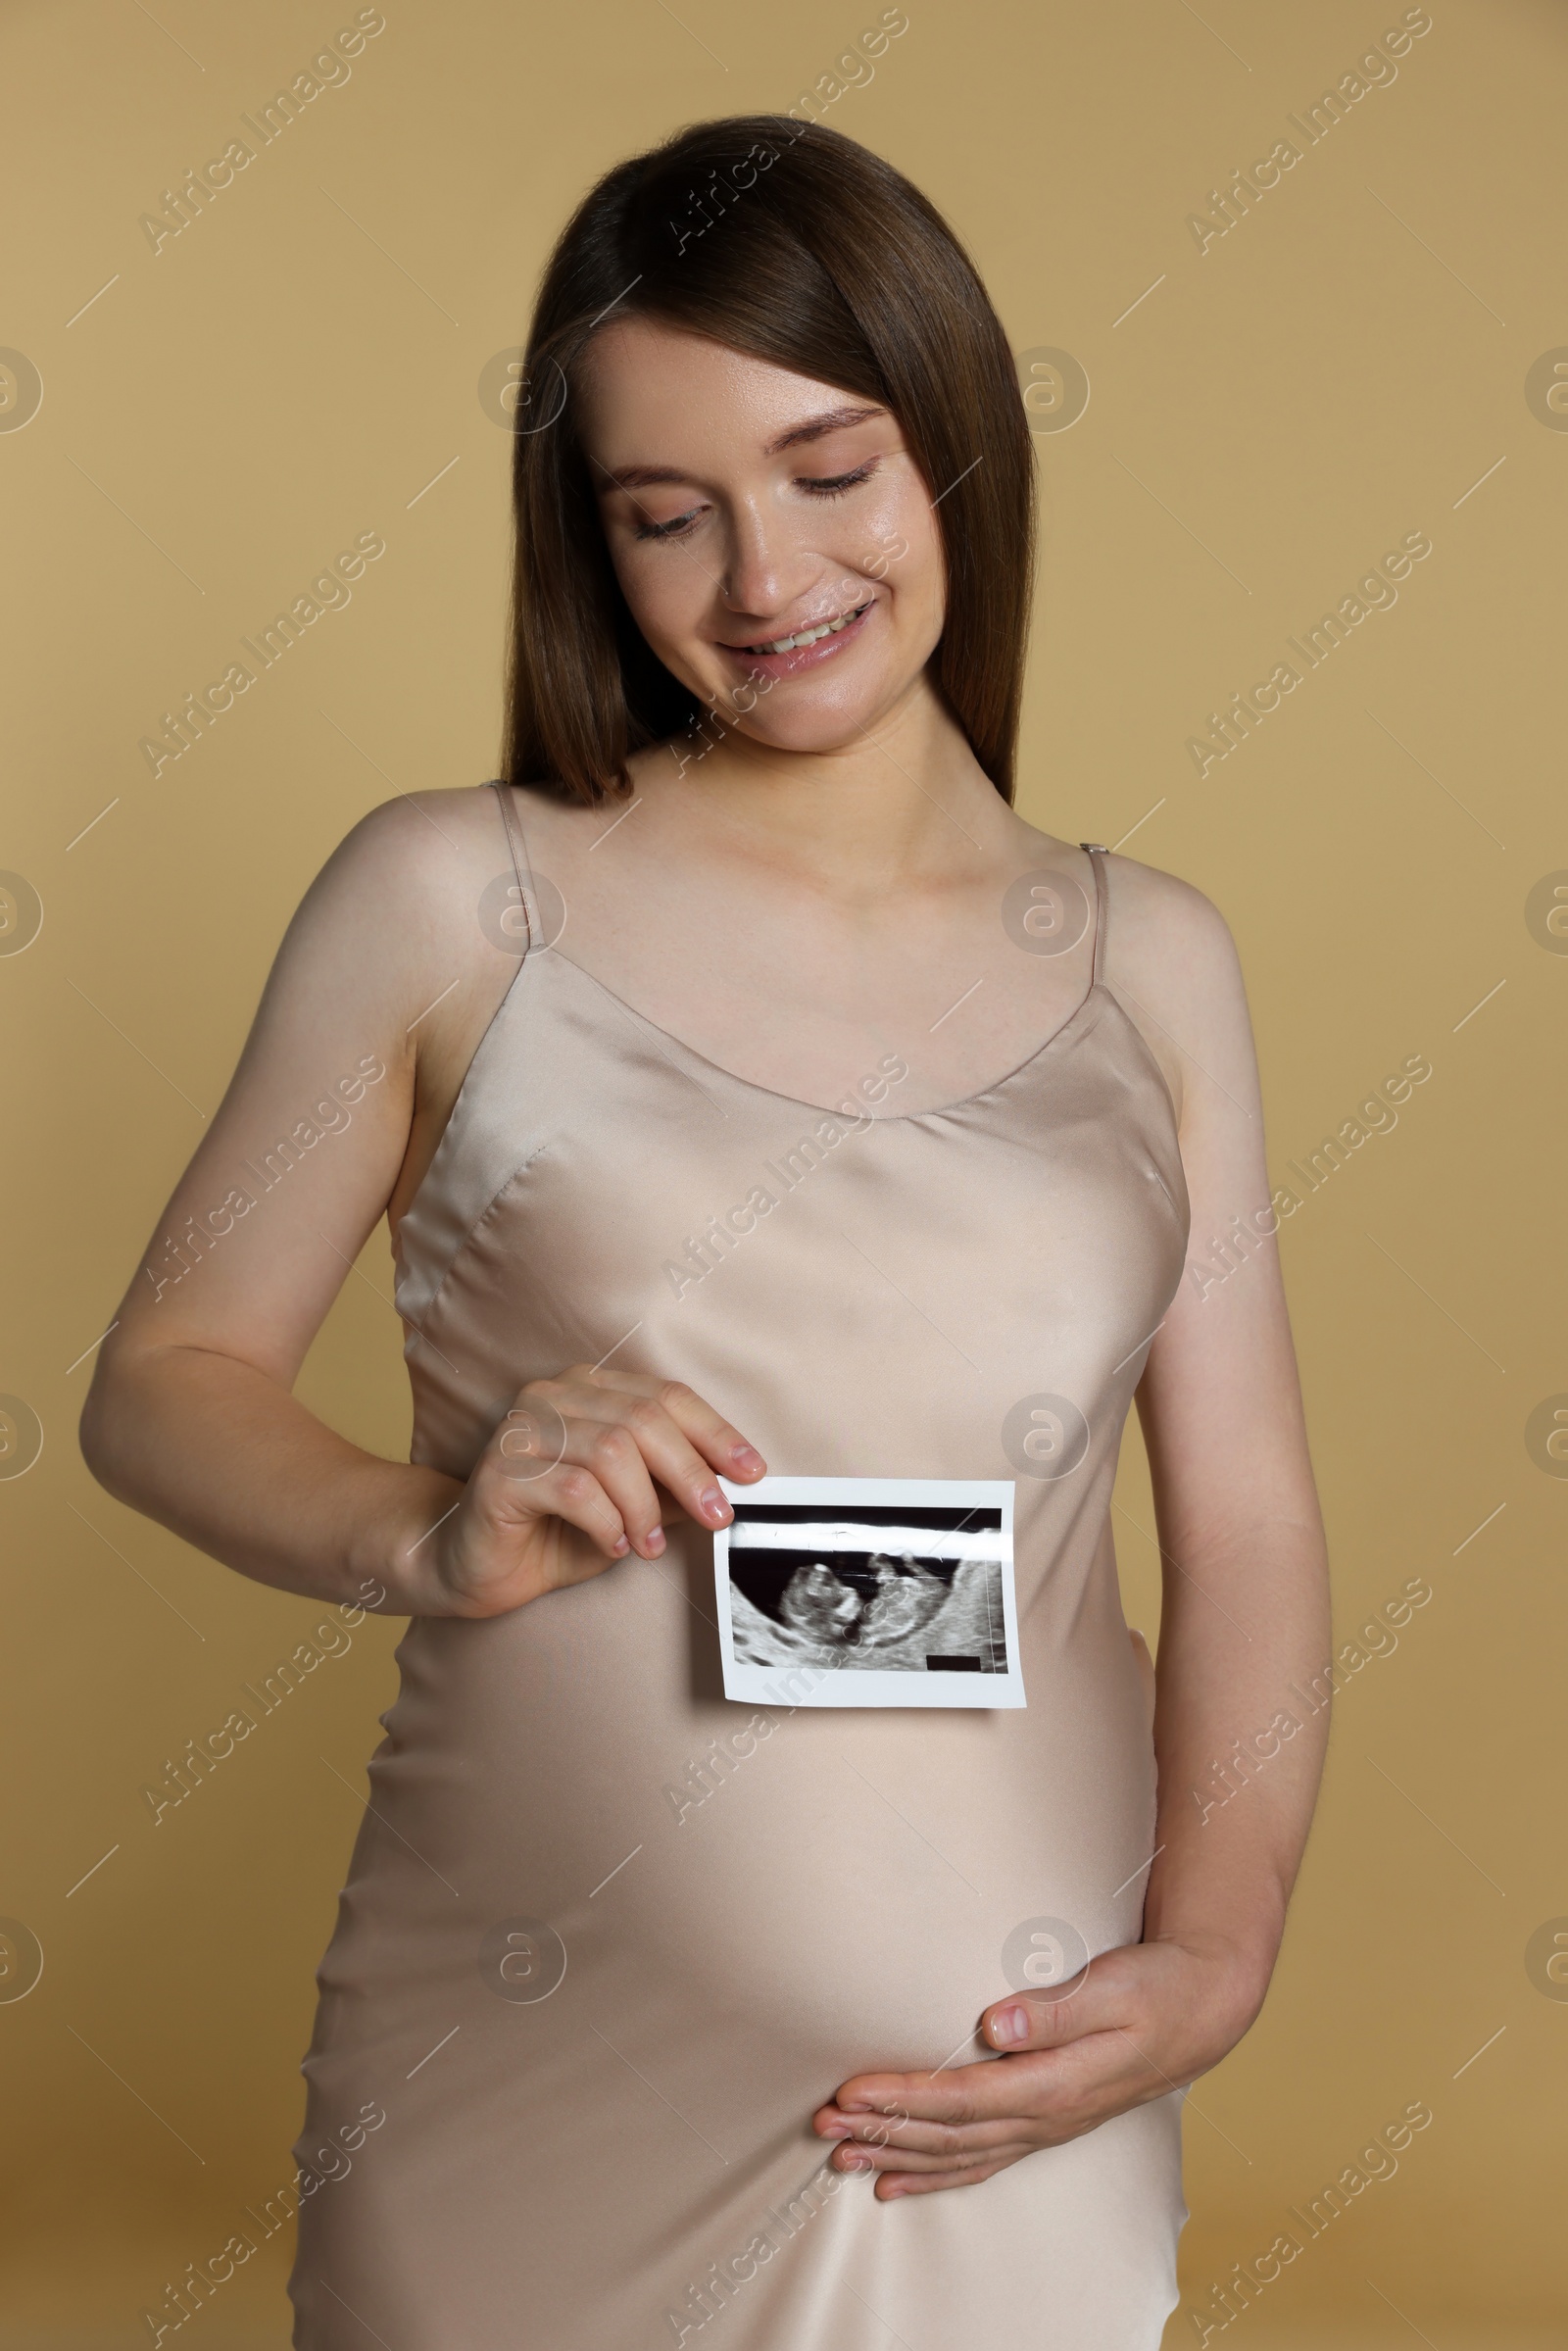 Photo of Pregnant woman with ultrasound picture of baby on beige background